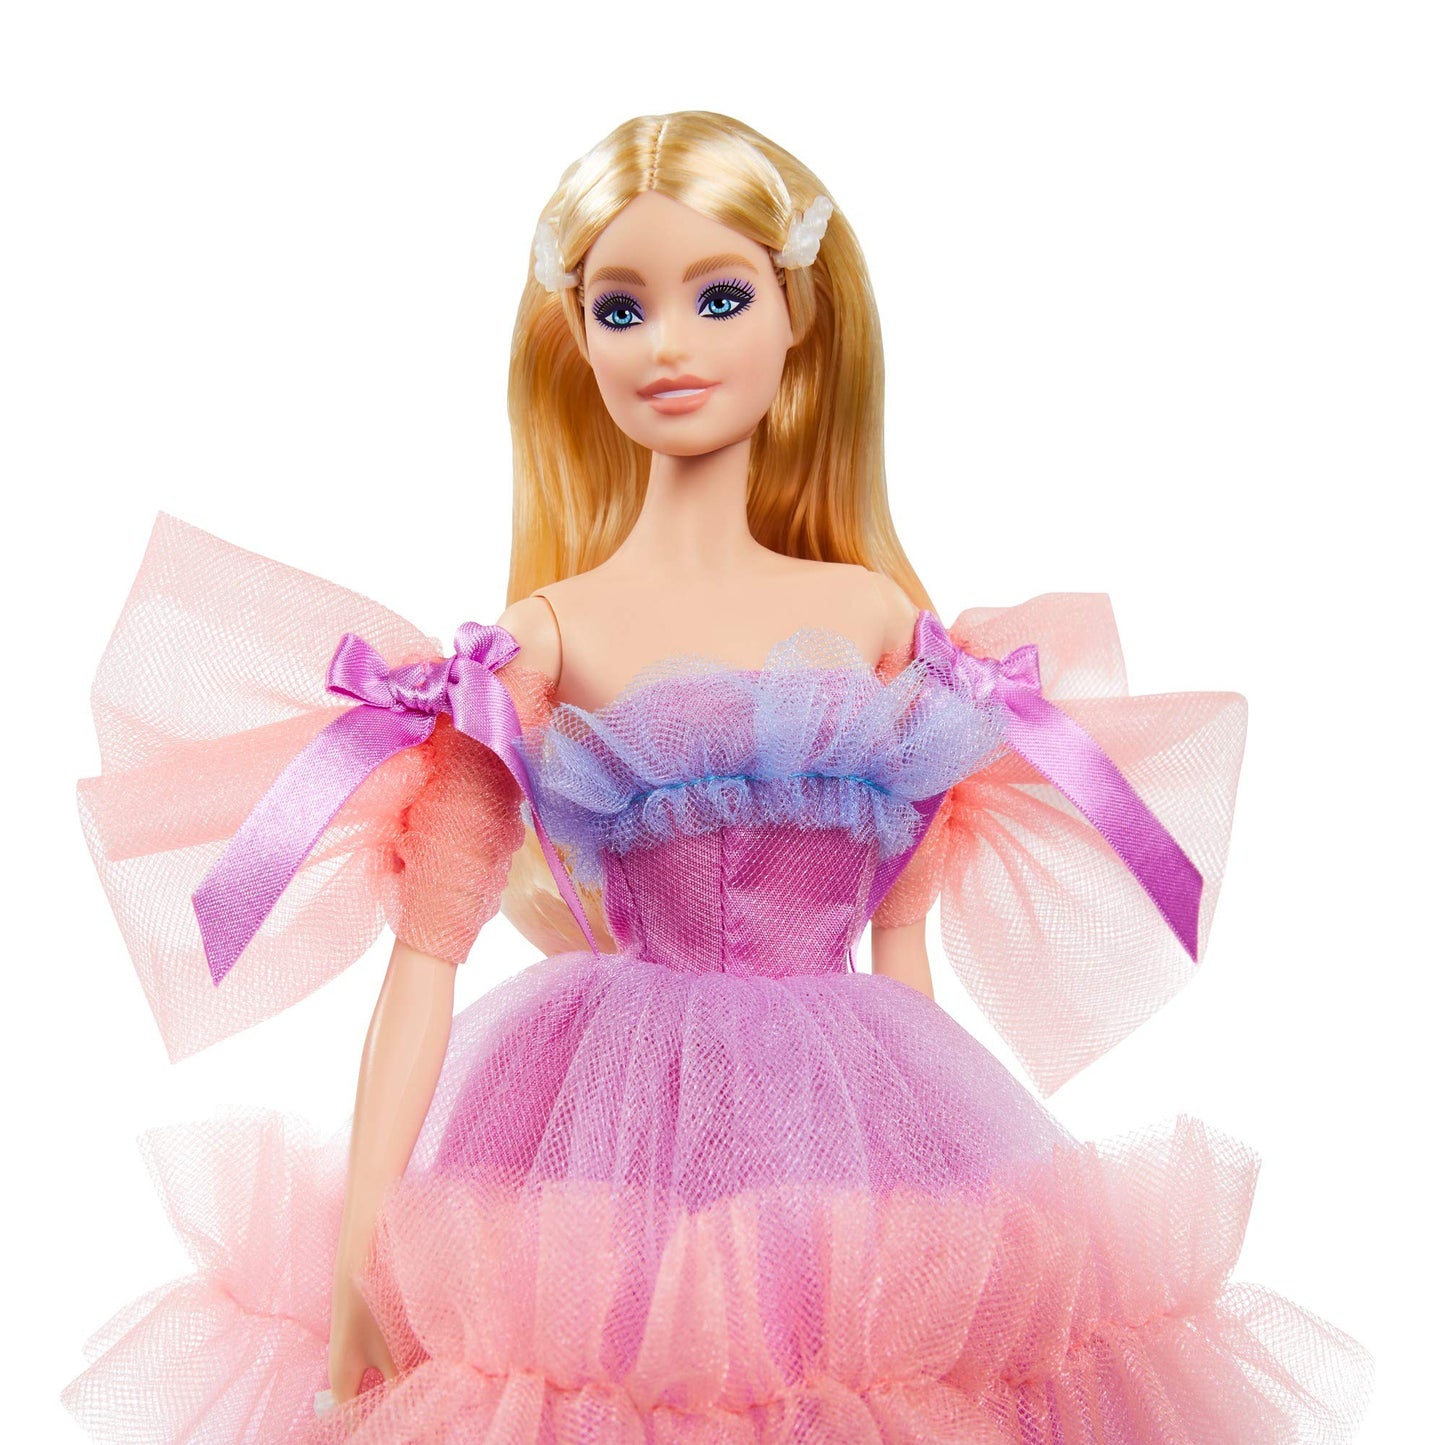 Barbie Birthday Wishes Doll (Blonde, 13-inch), Wearing Ruffled Gown, with Doll Stand and Certificate of Authenticity, Gift for 6 Year Olds and Up